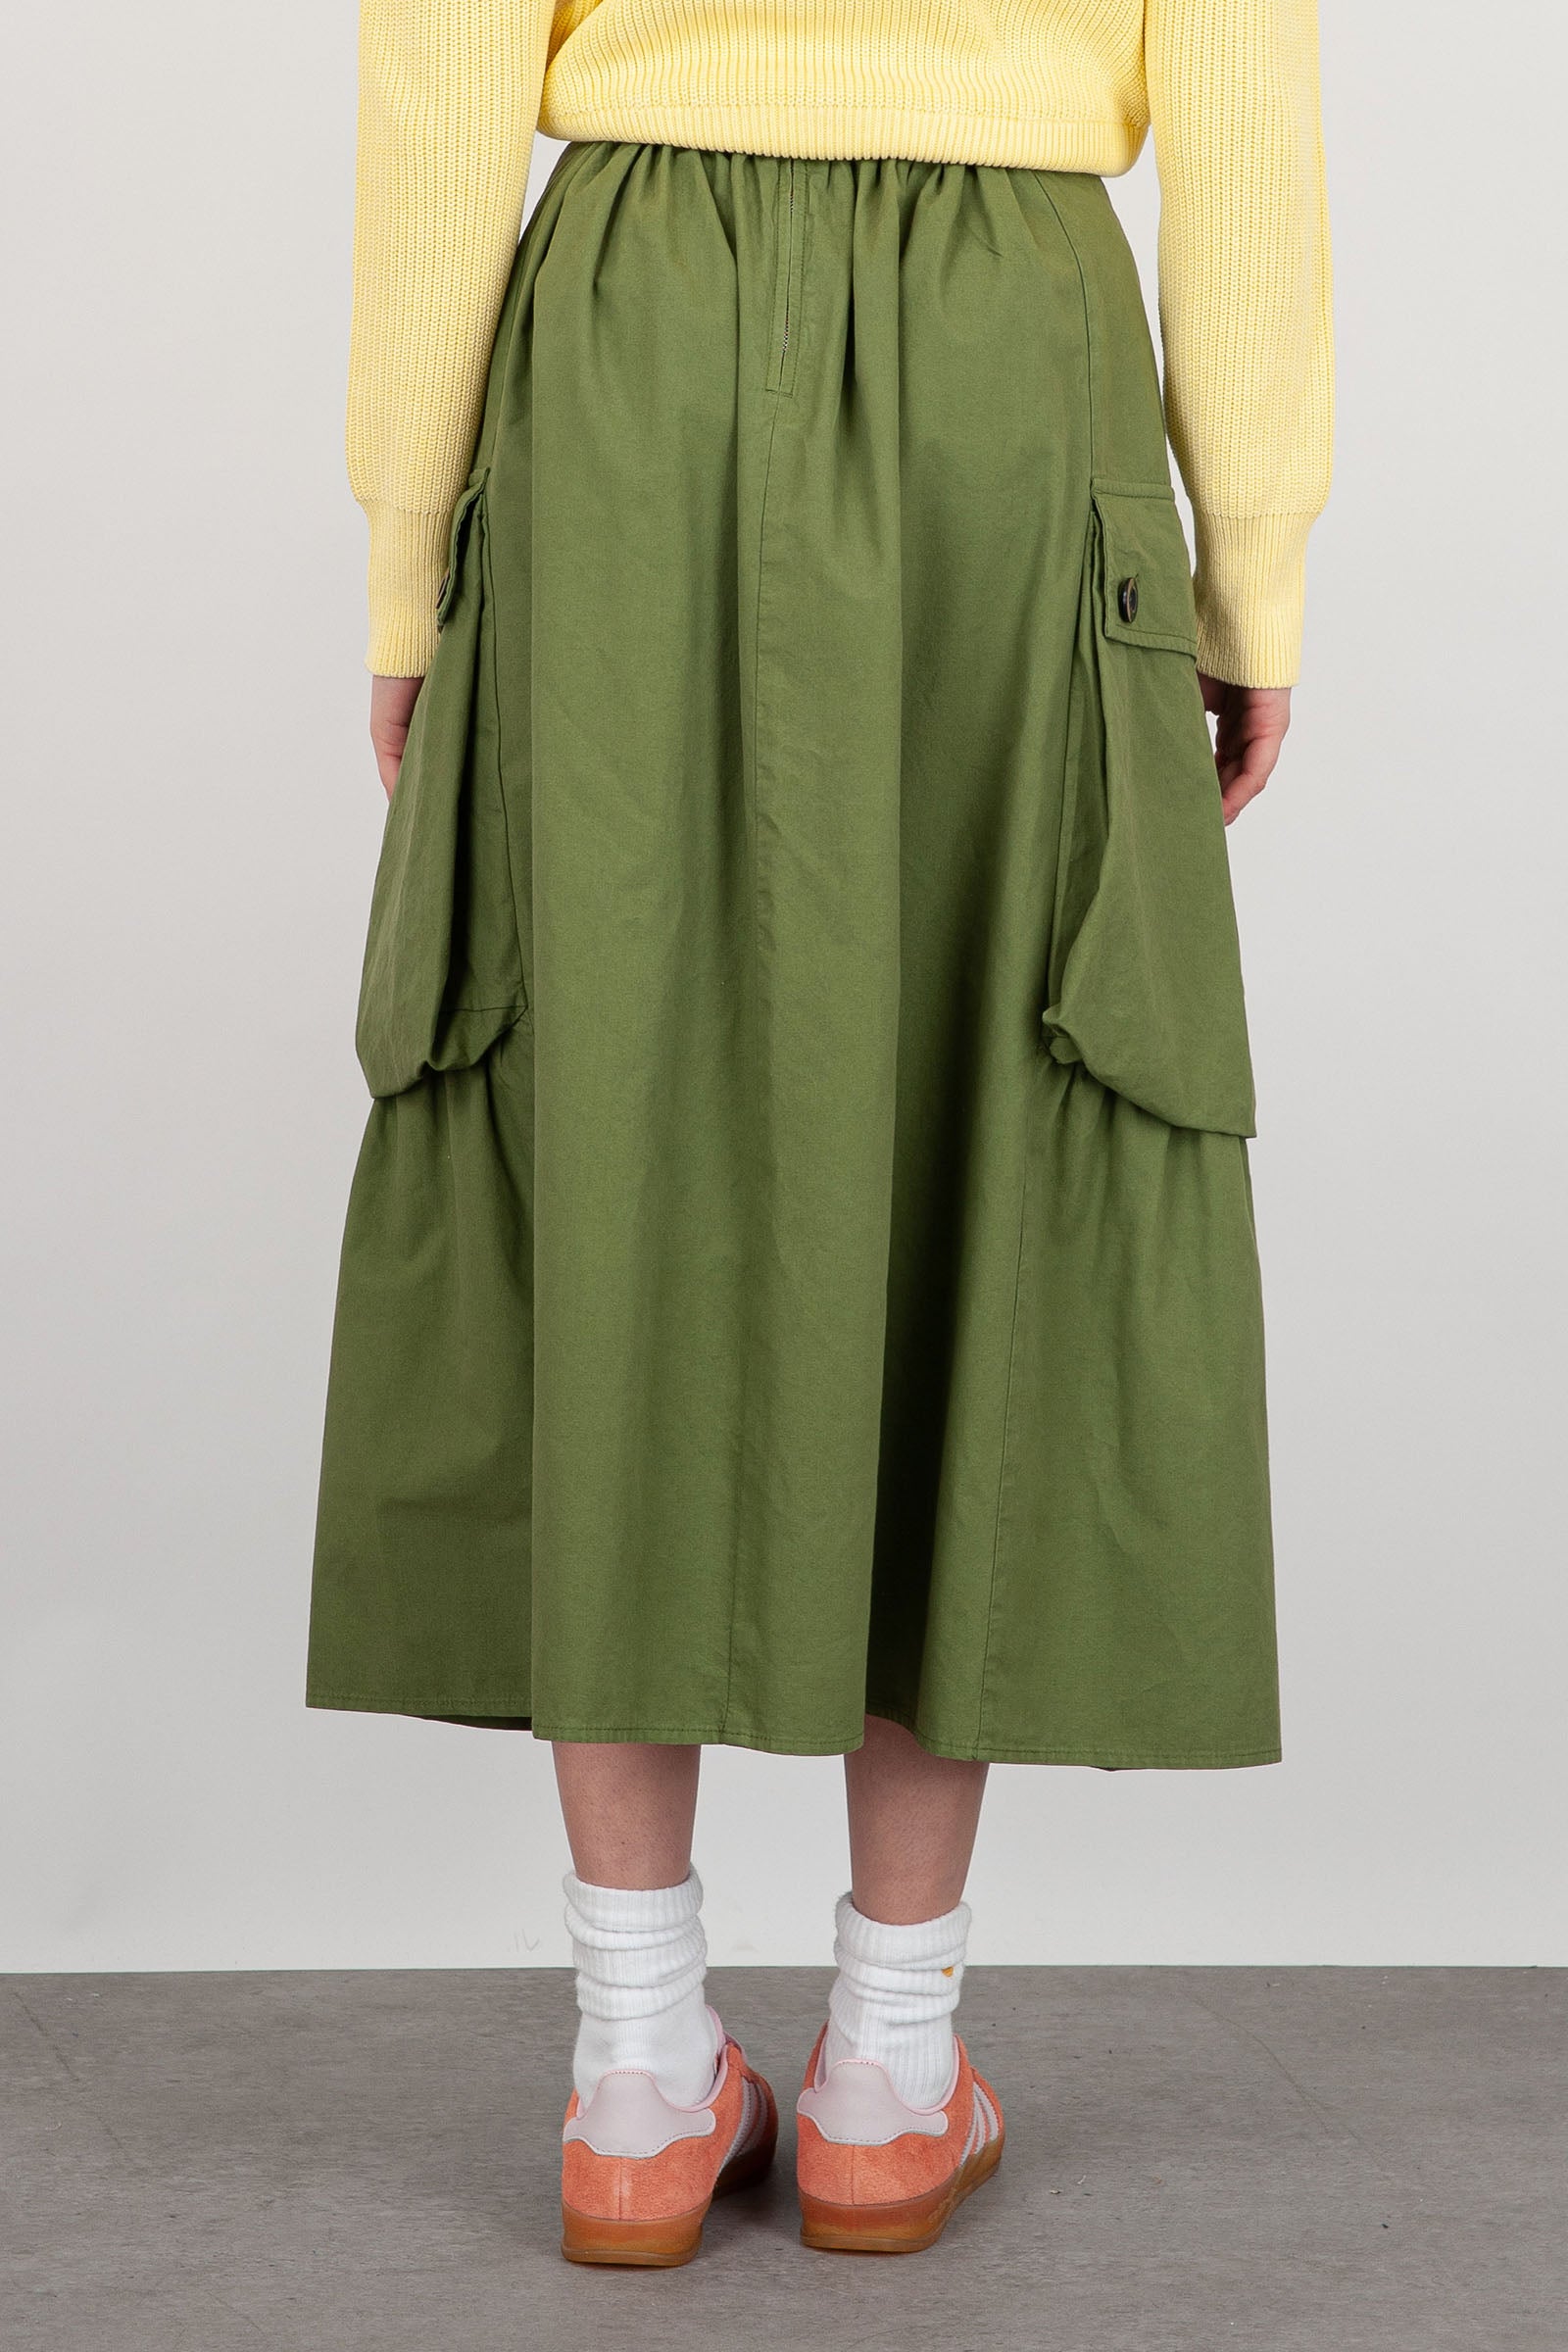 Department Five Selma Skirt in Military Green Cotton - 5